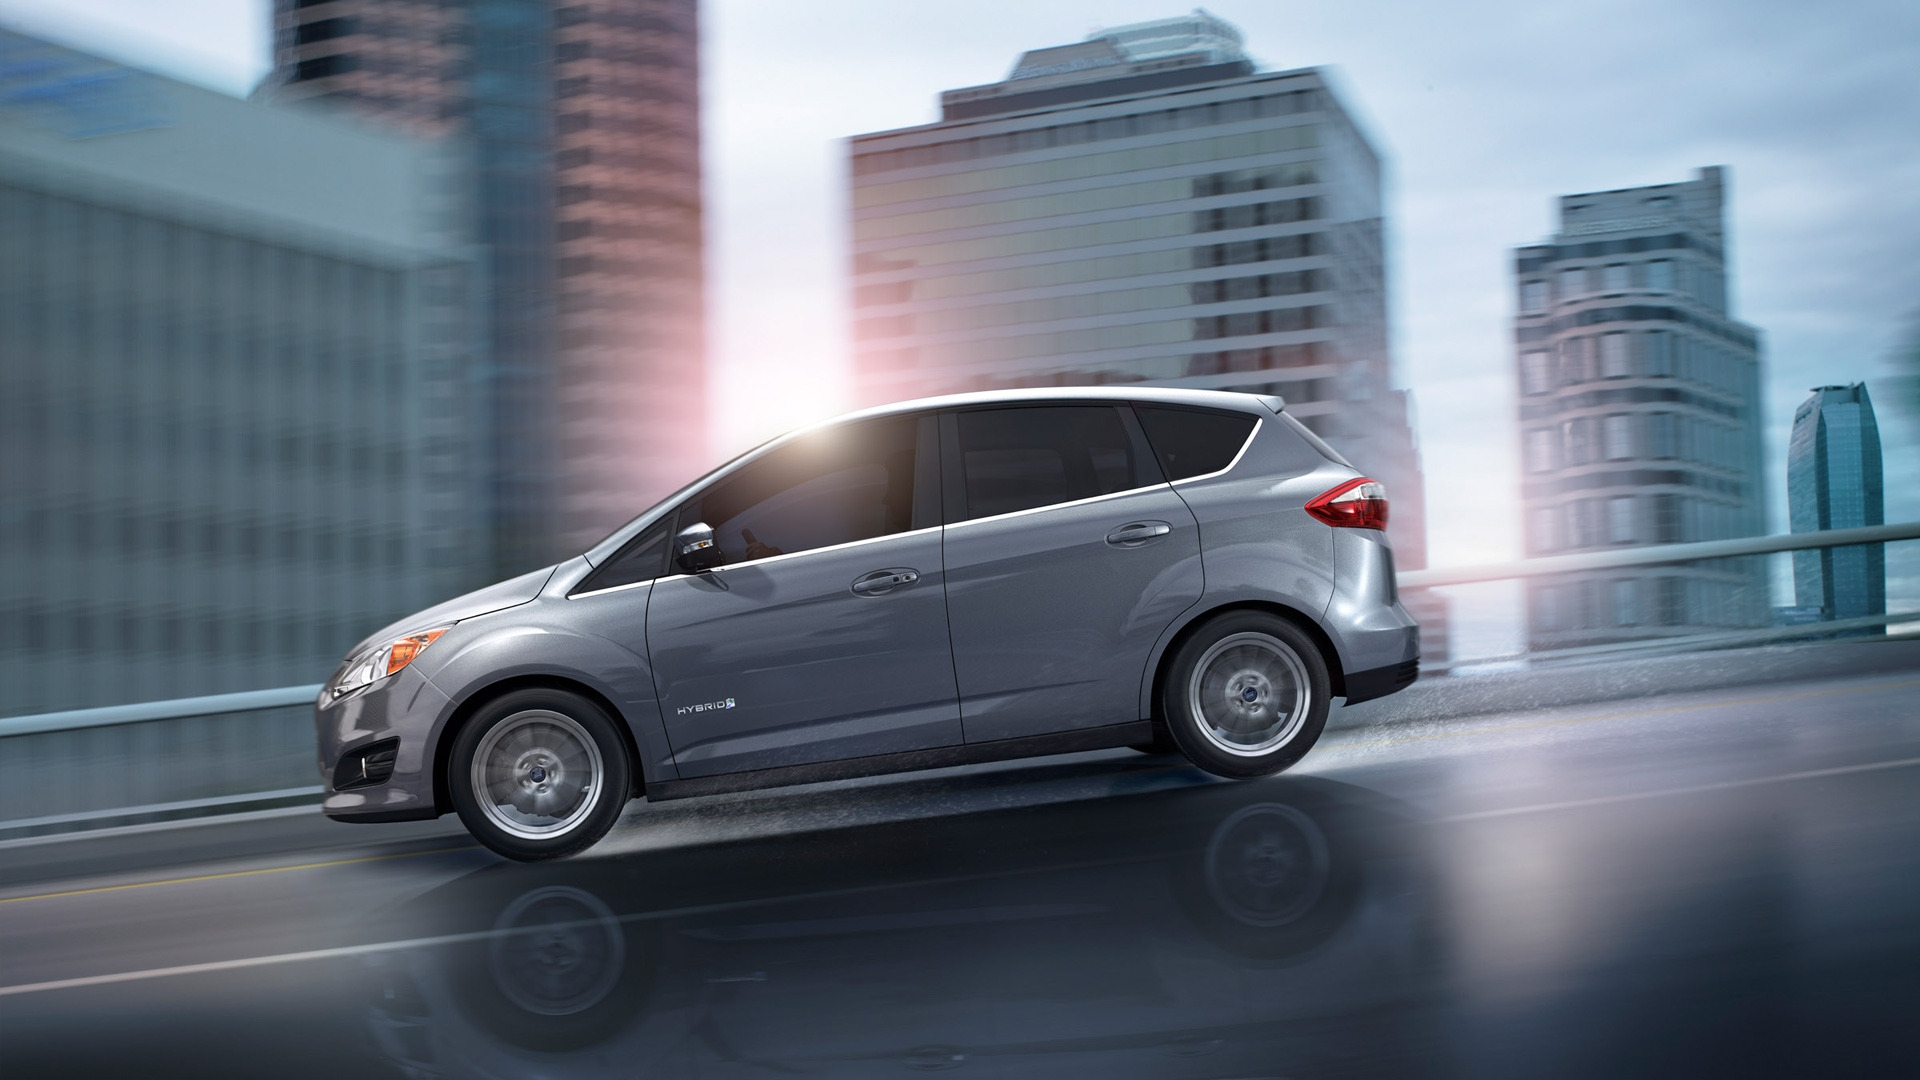 Ford C Max Hybrid Side View 2013 for 1920 x 1080 HDTV 1080p resolution